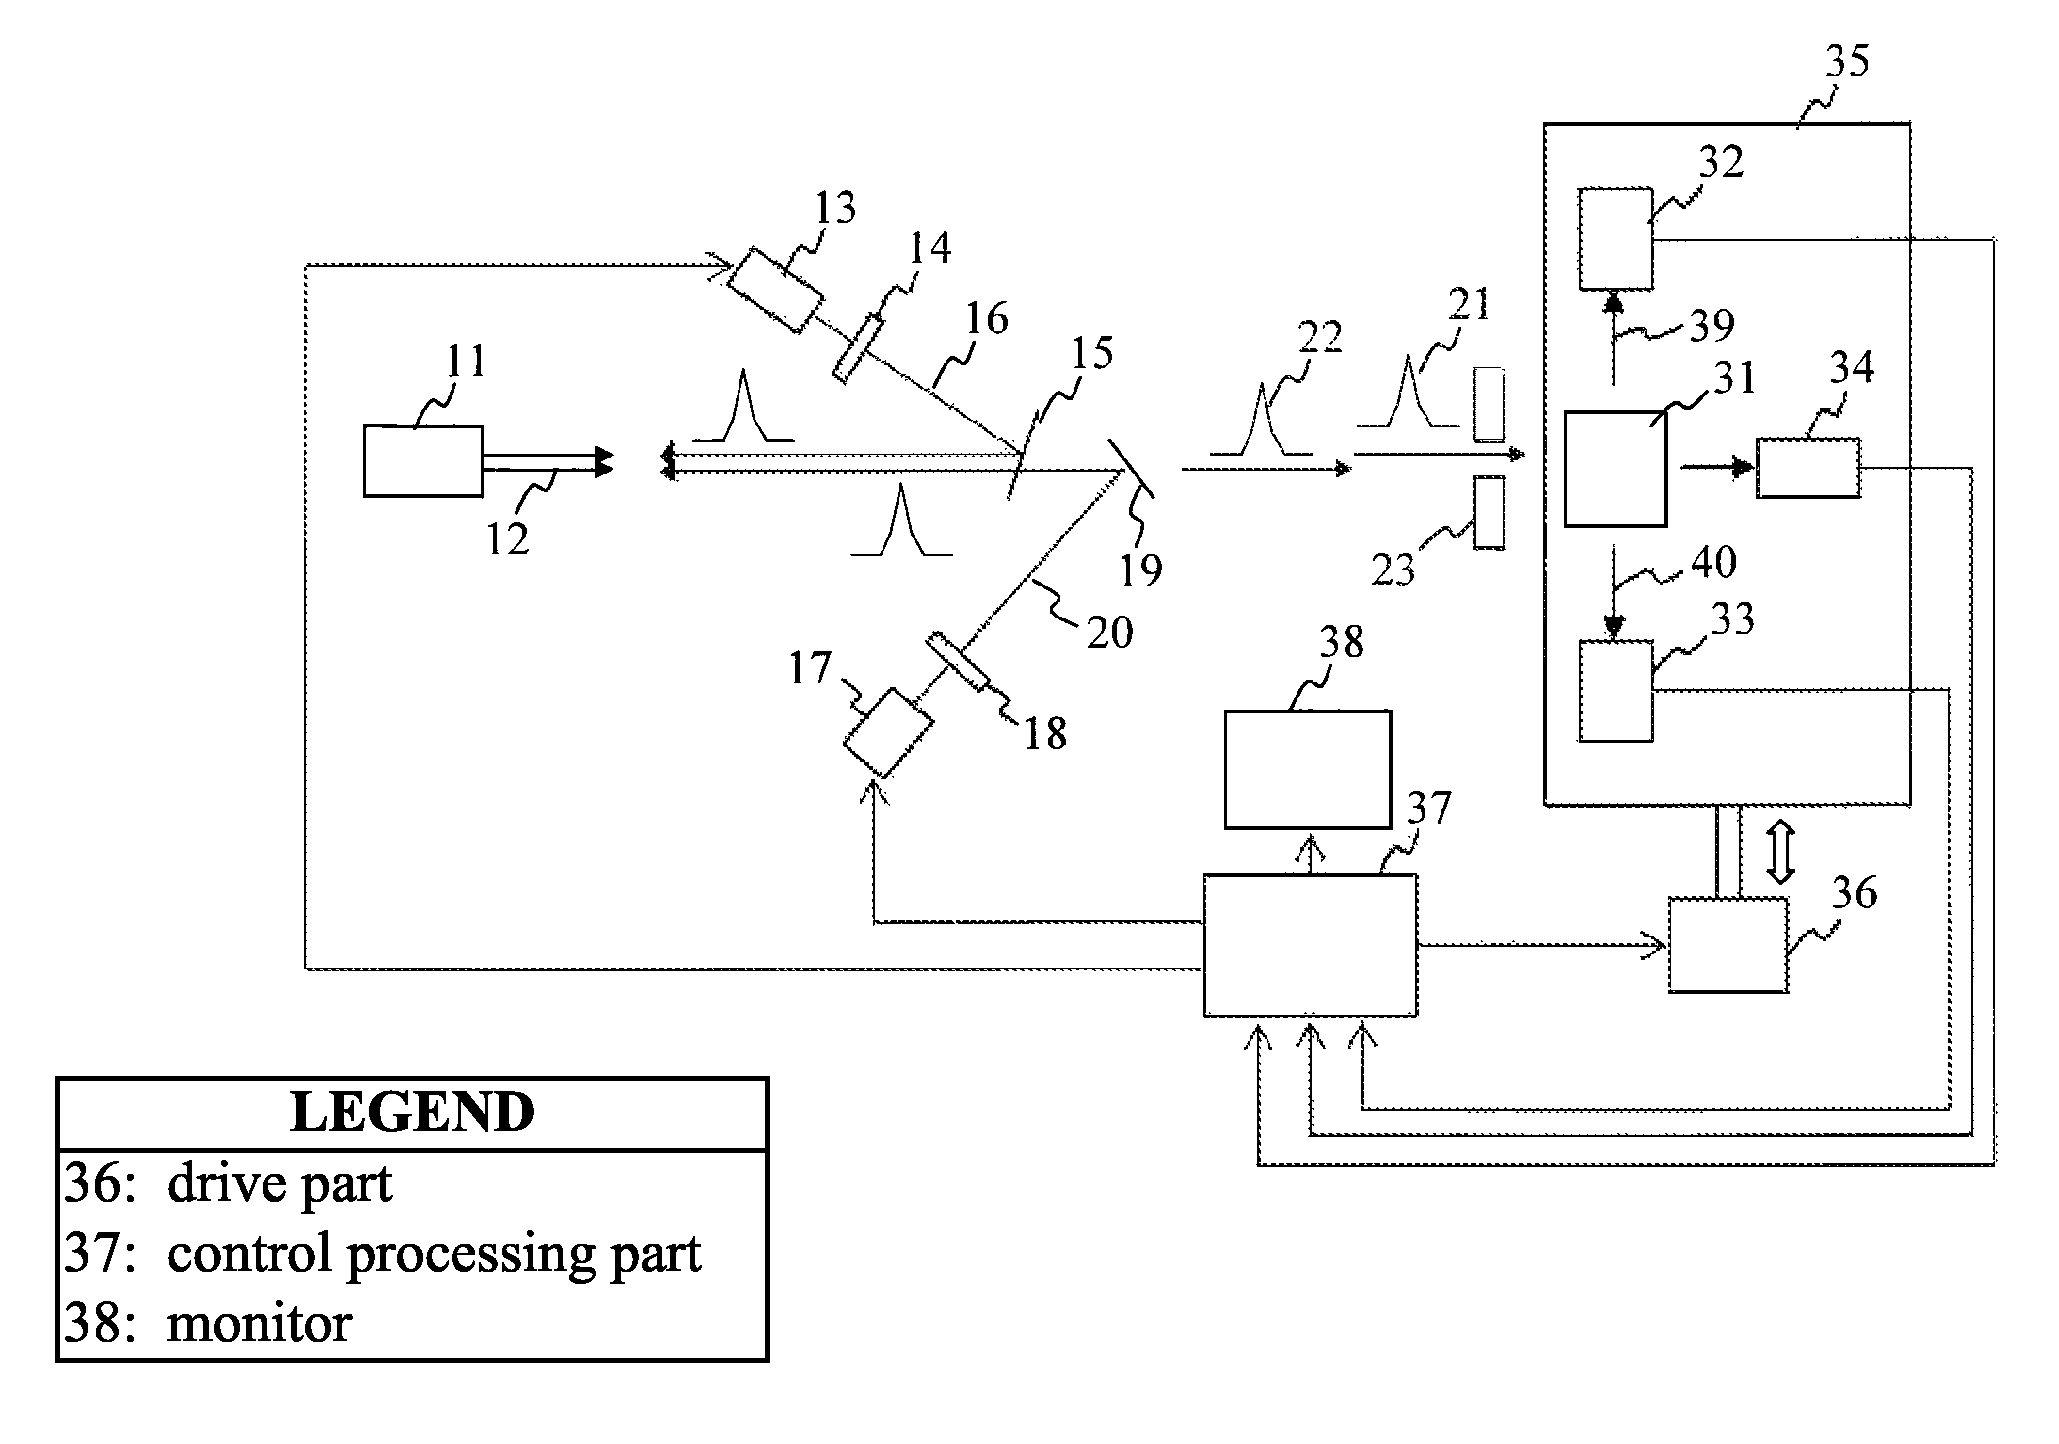 Nondestructive inspection system using nuclear resonance fluorescence